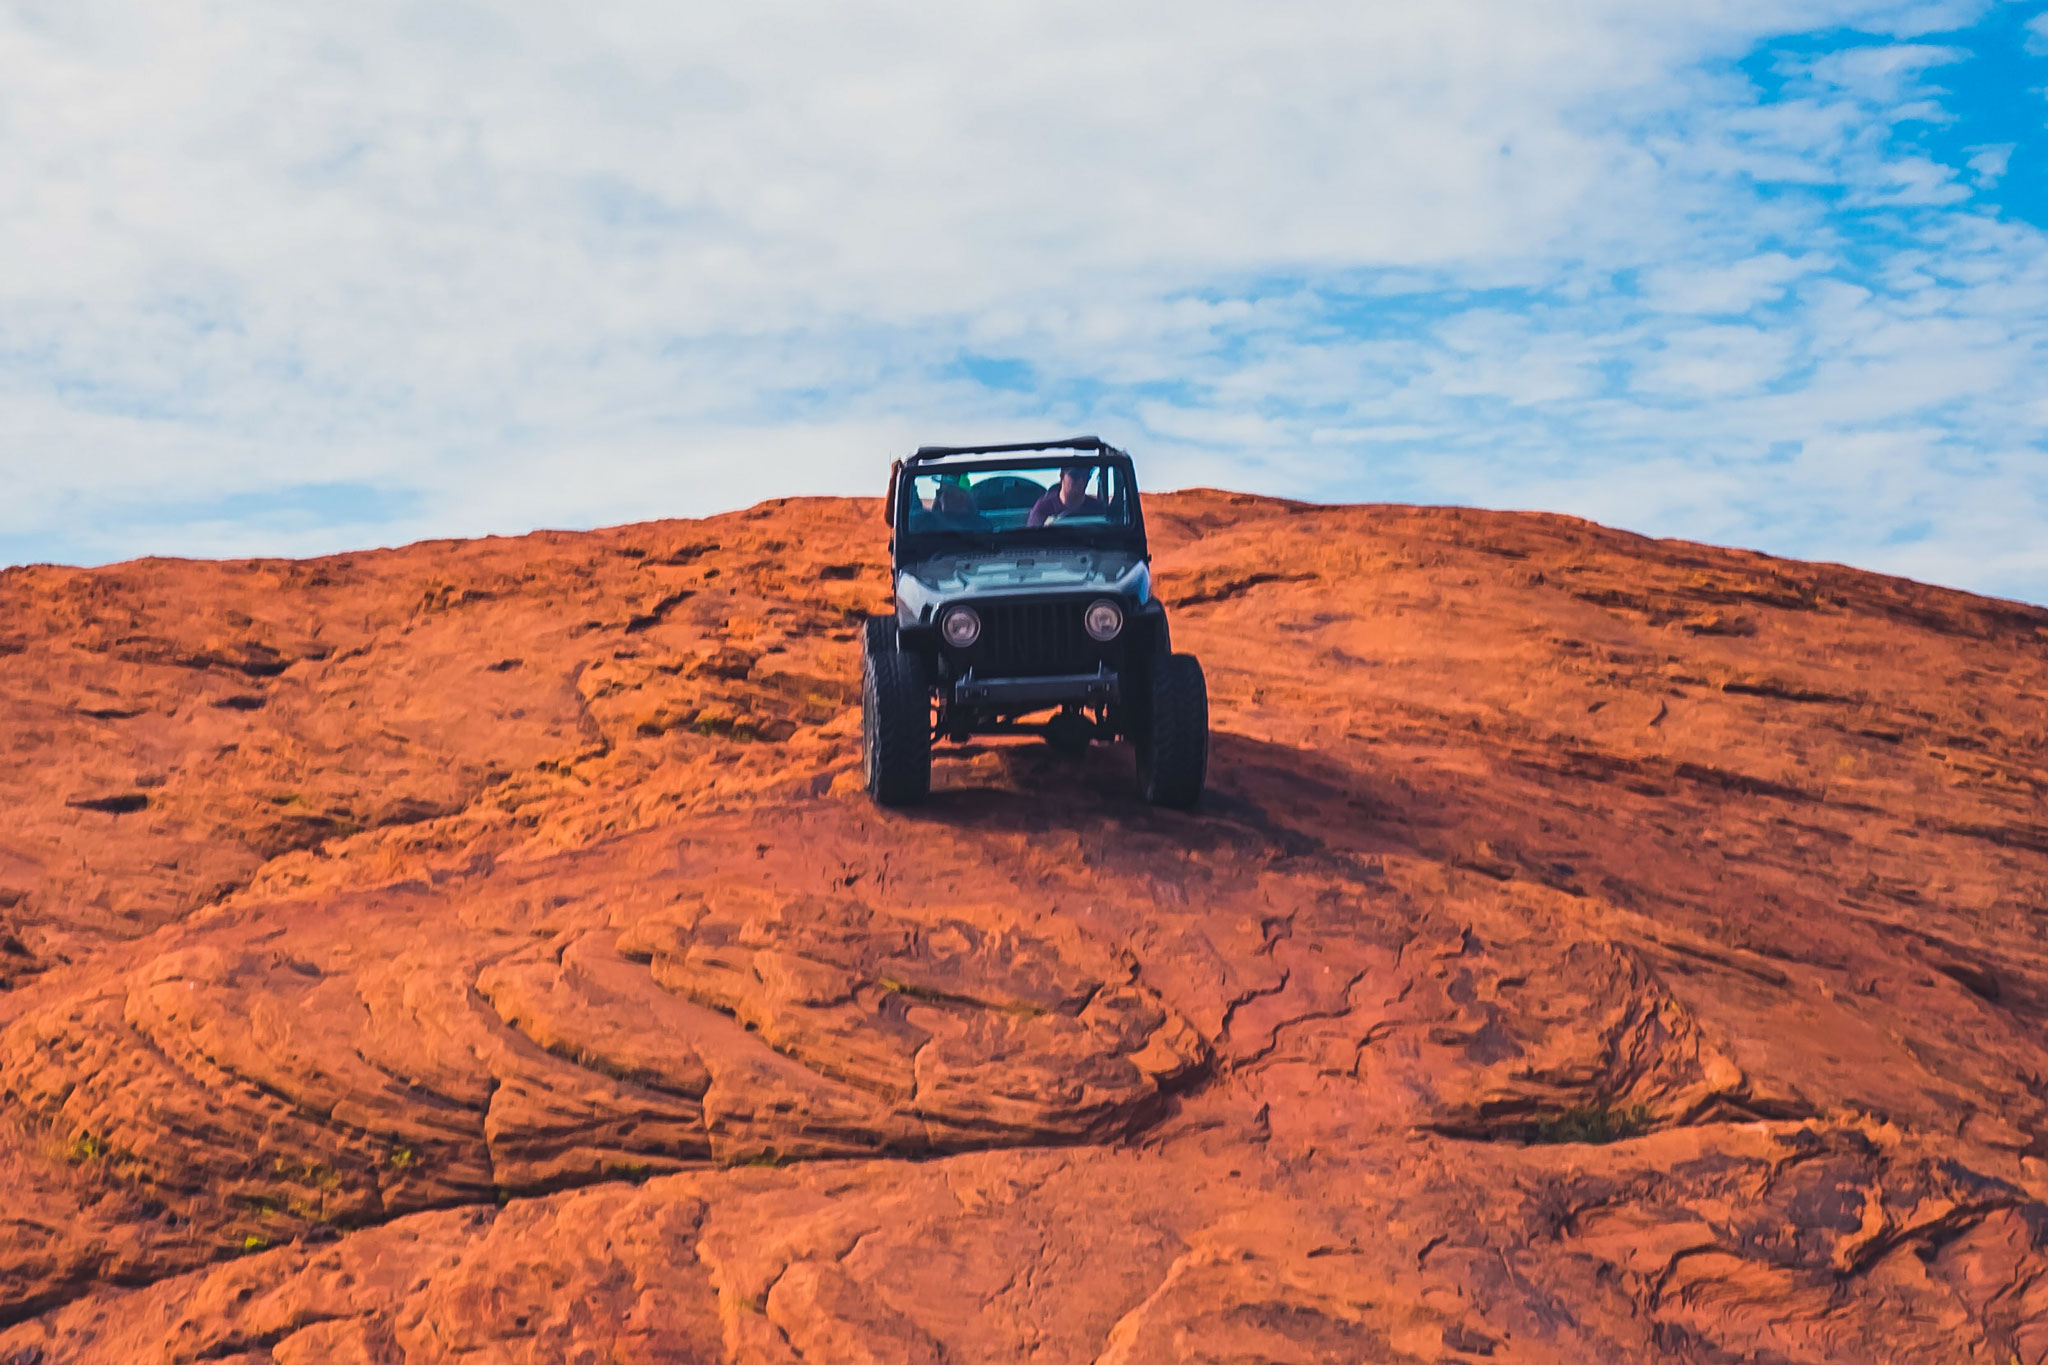 Mastering the trail: Essential tips and gear for off-roading